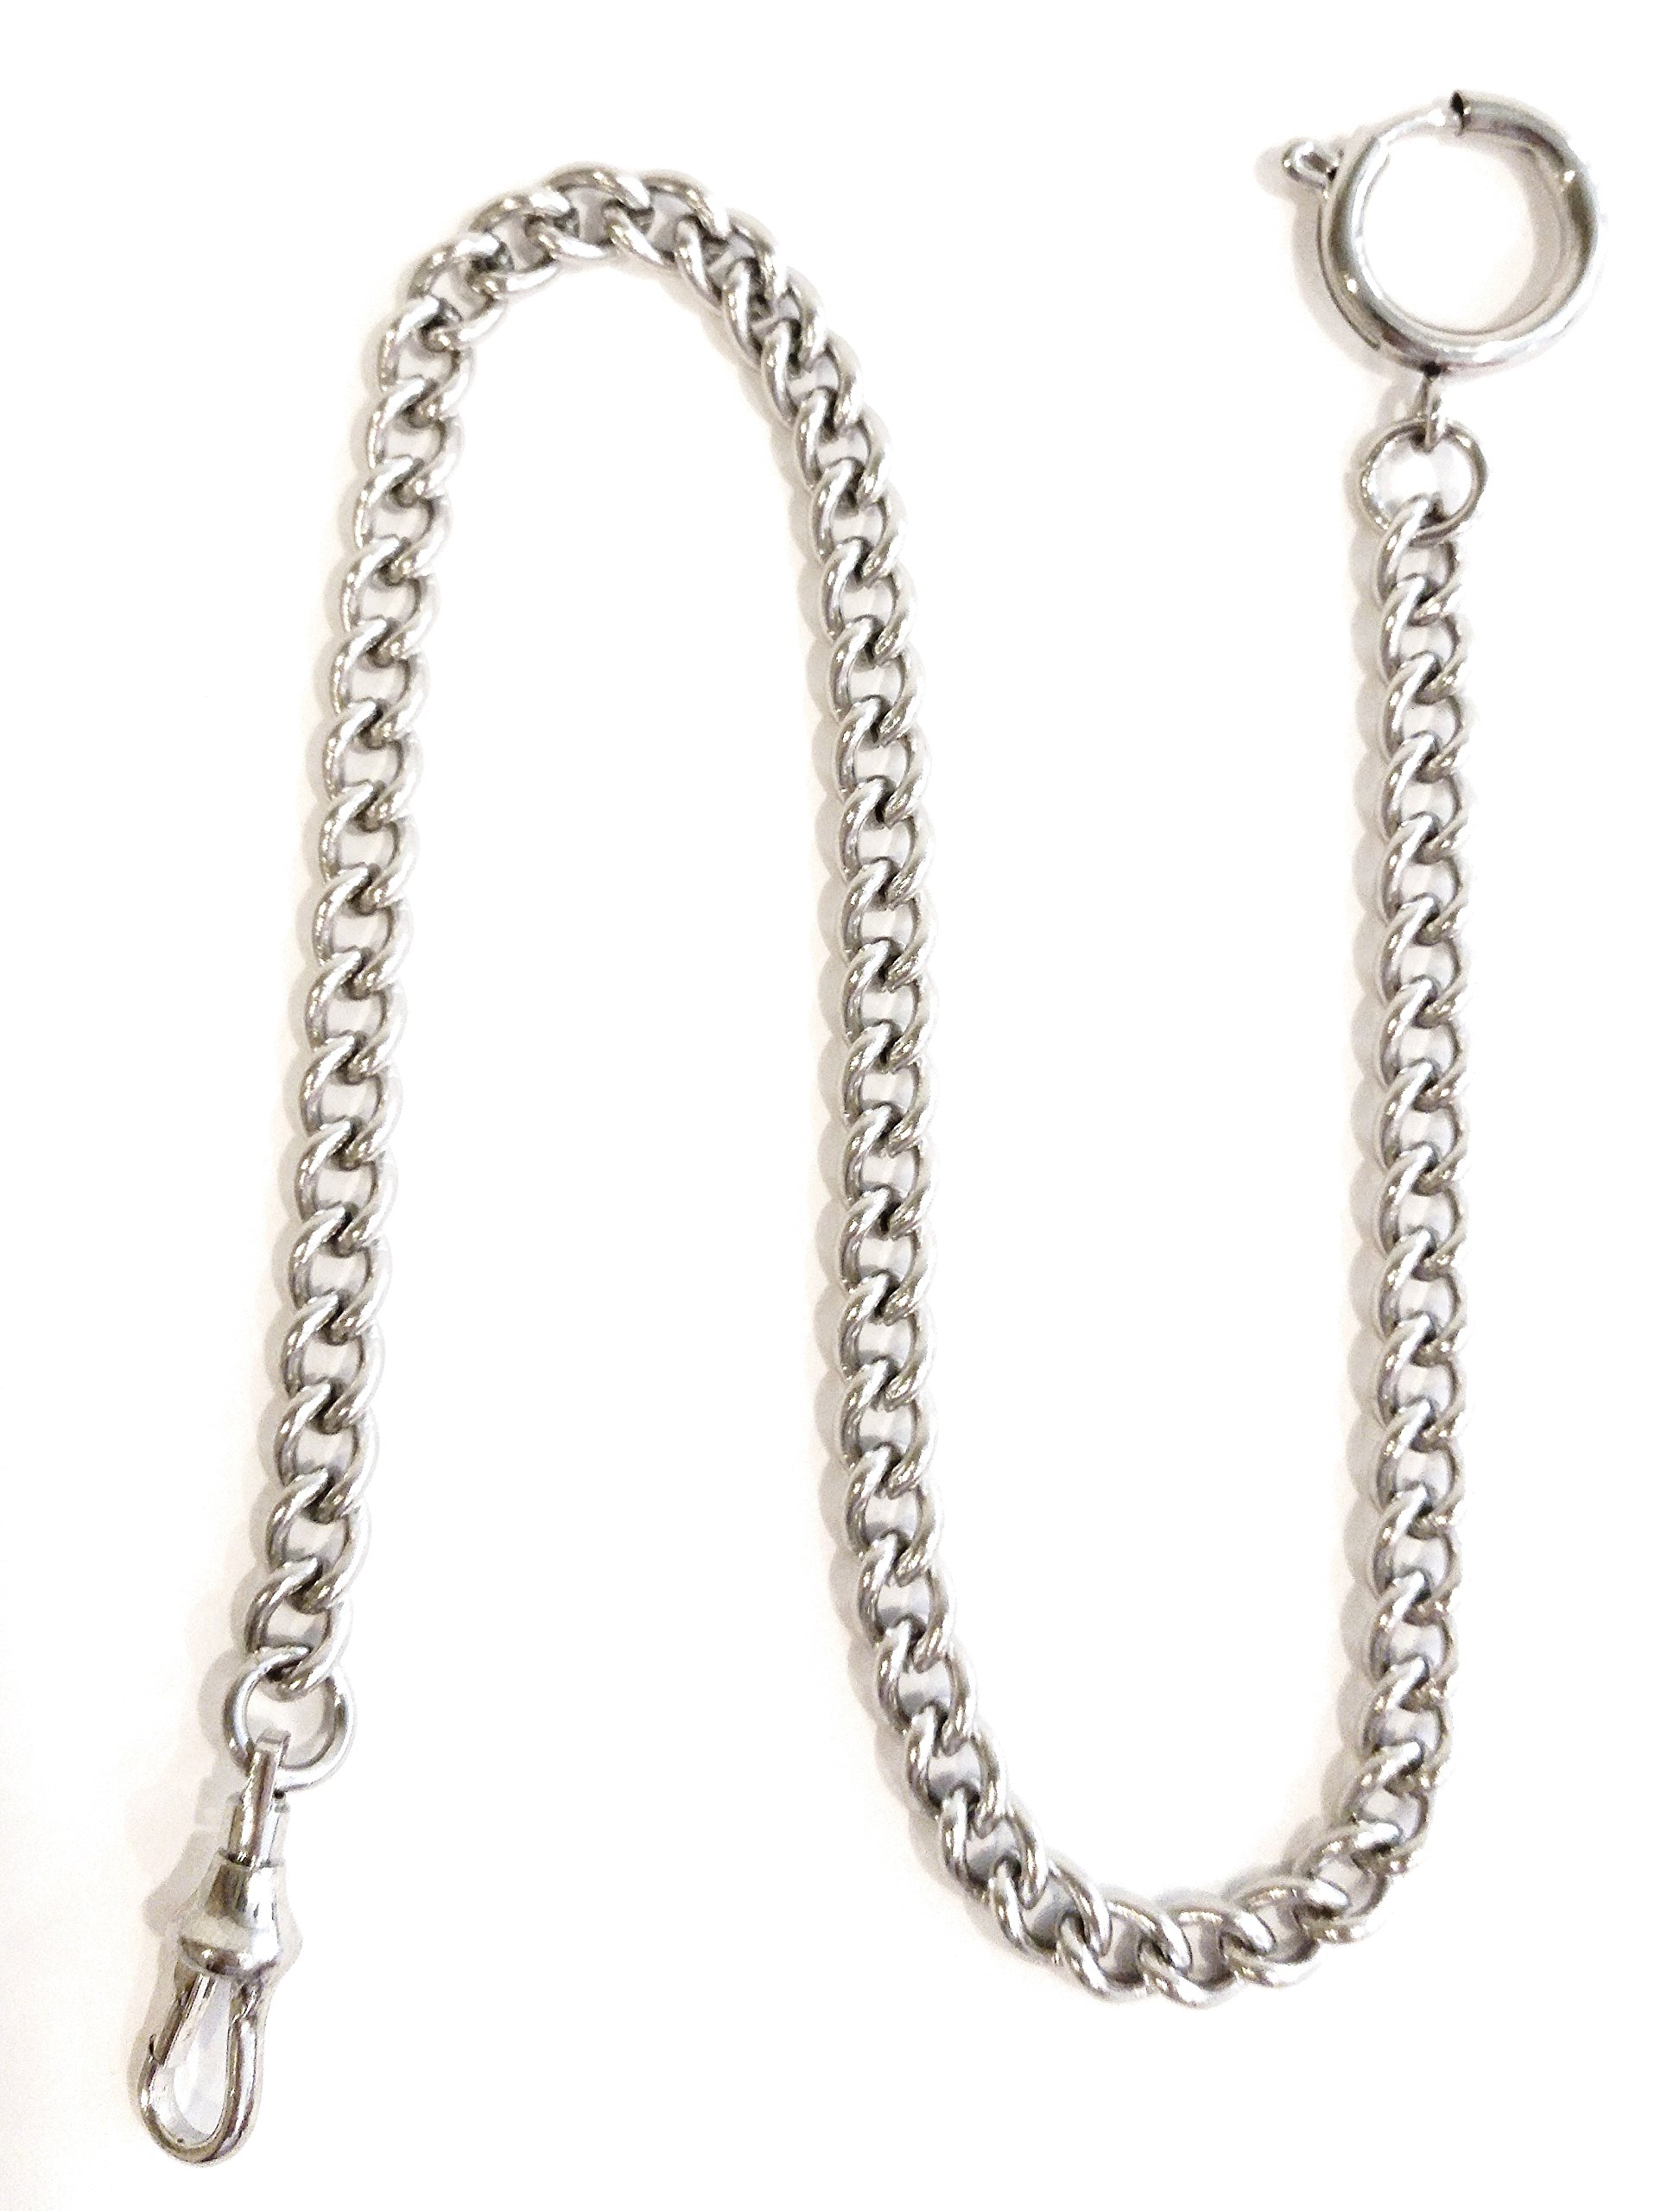 Dueber Chrome Plated Stainless Steel Pocket Watch Chain with Spring Ring